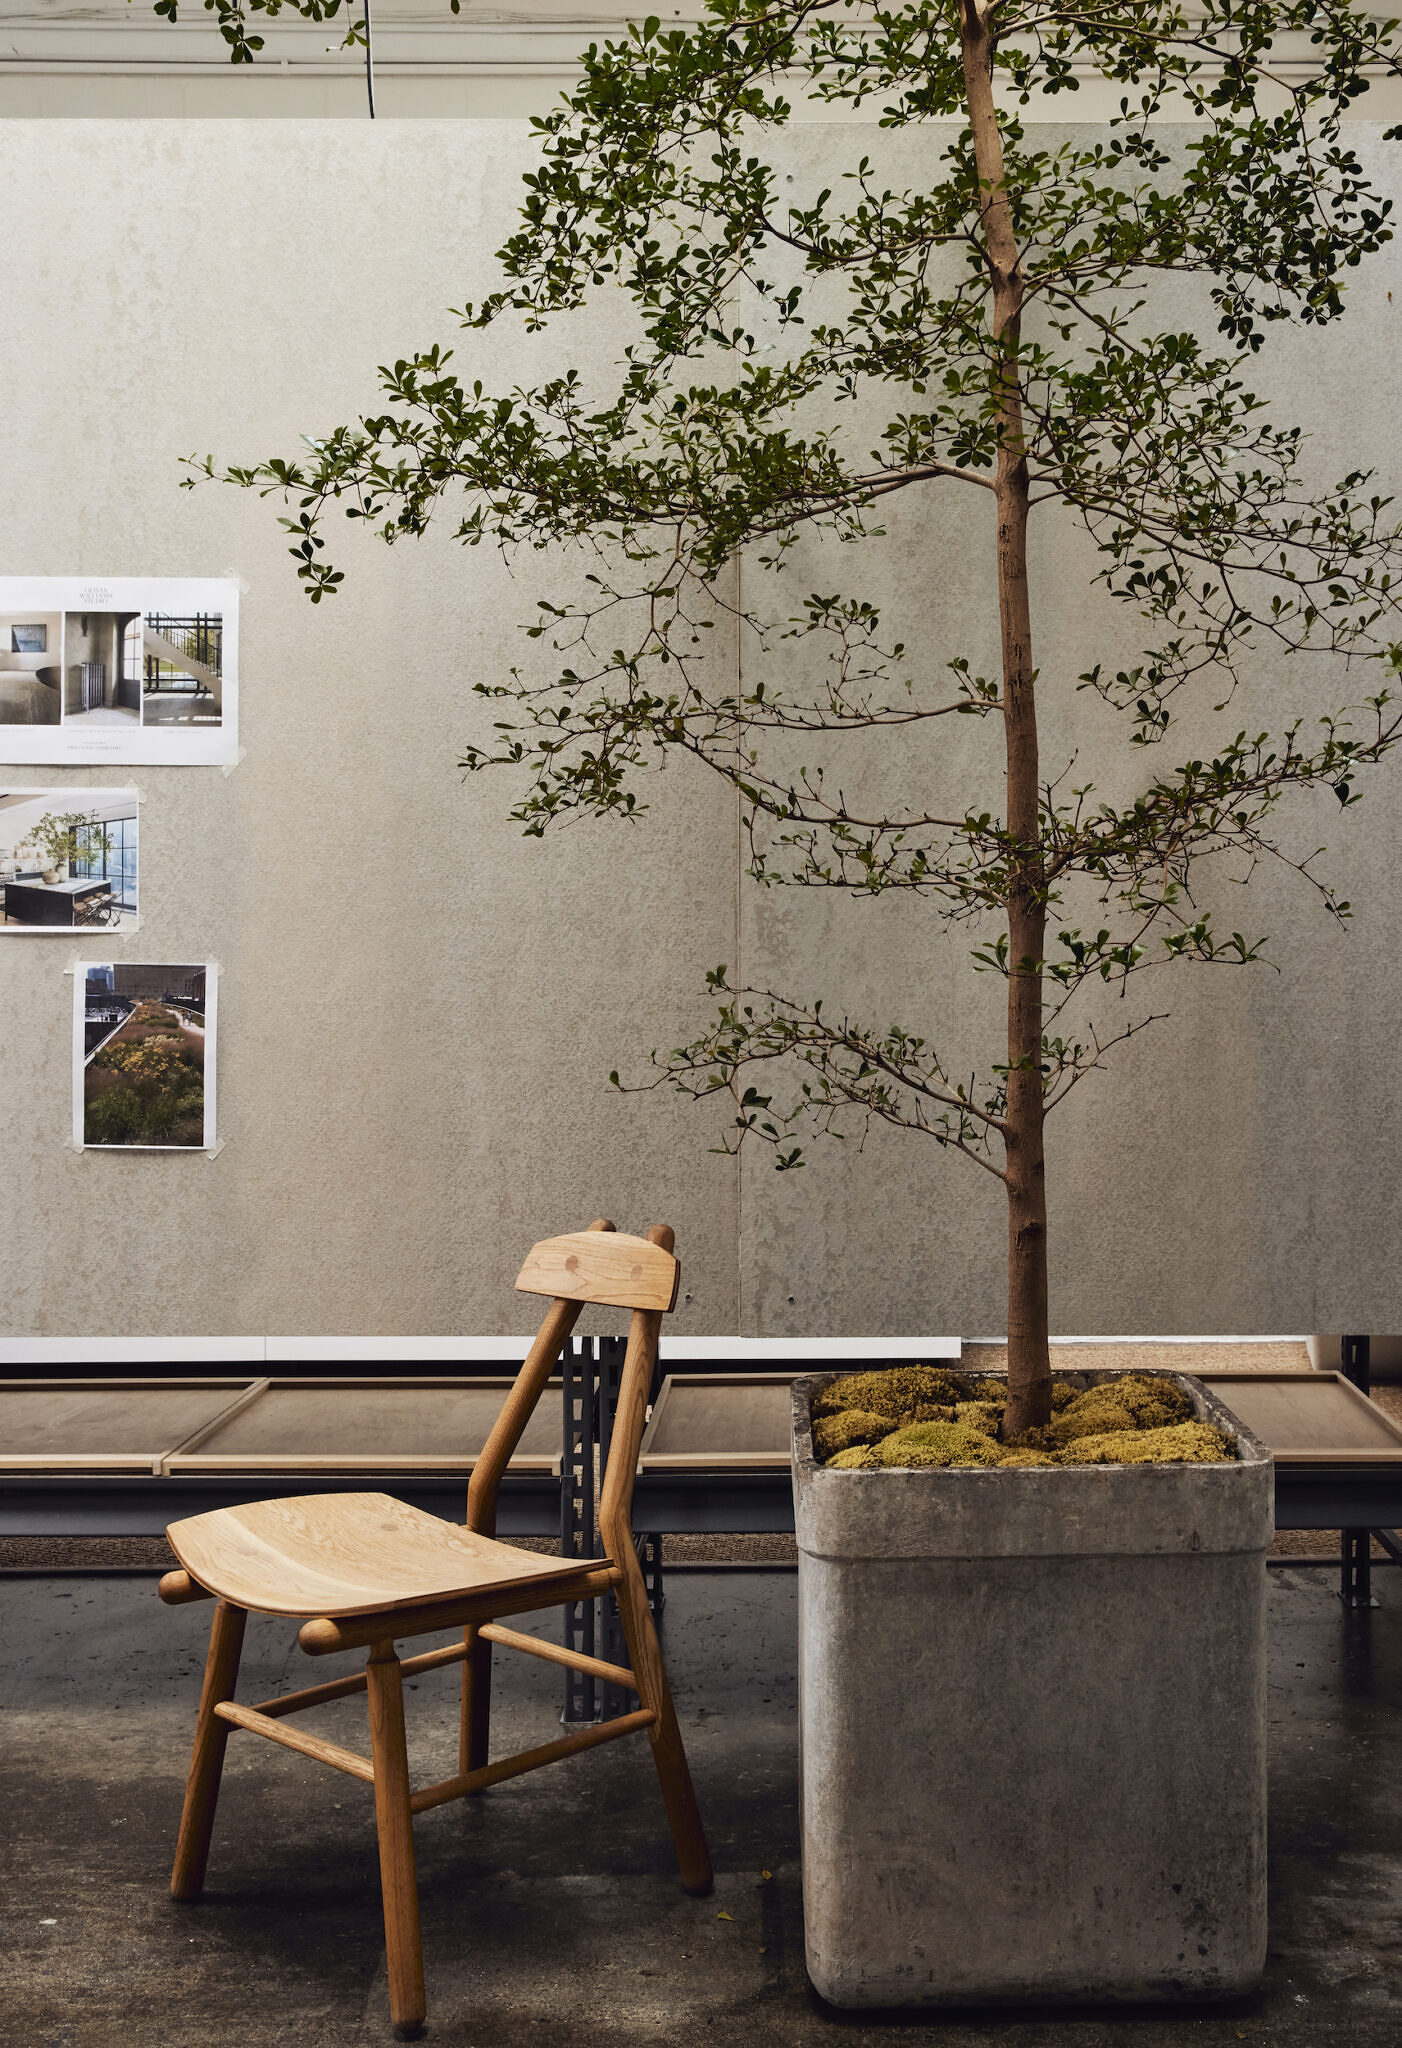 Image of a large tree and chair, with a wall of images behind inside the OWS Studio.